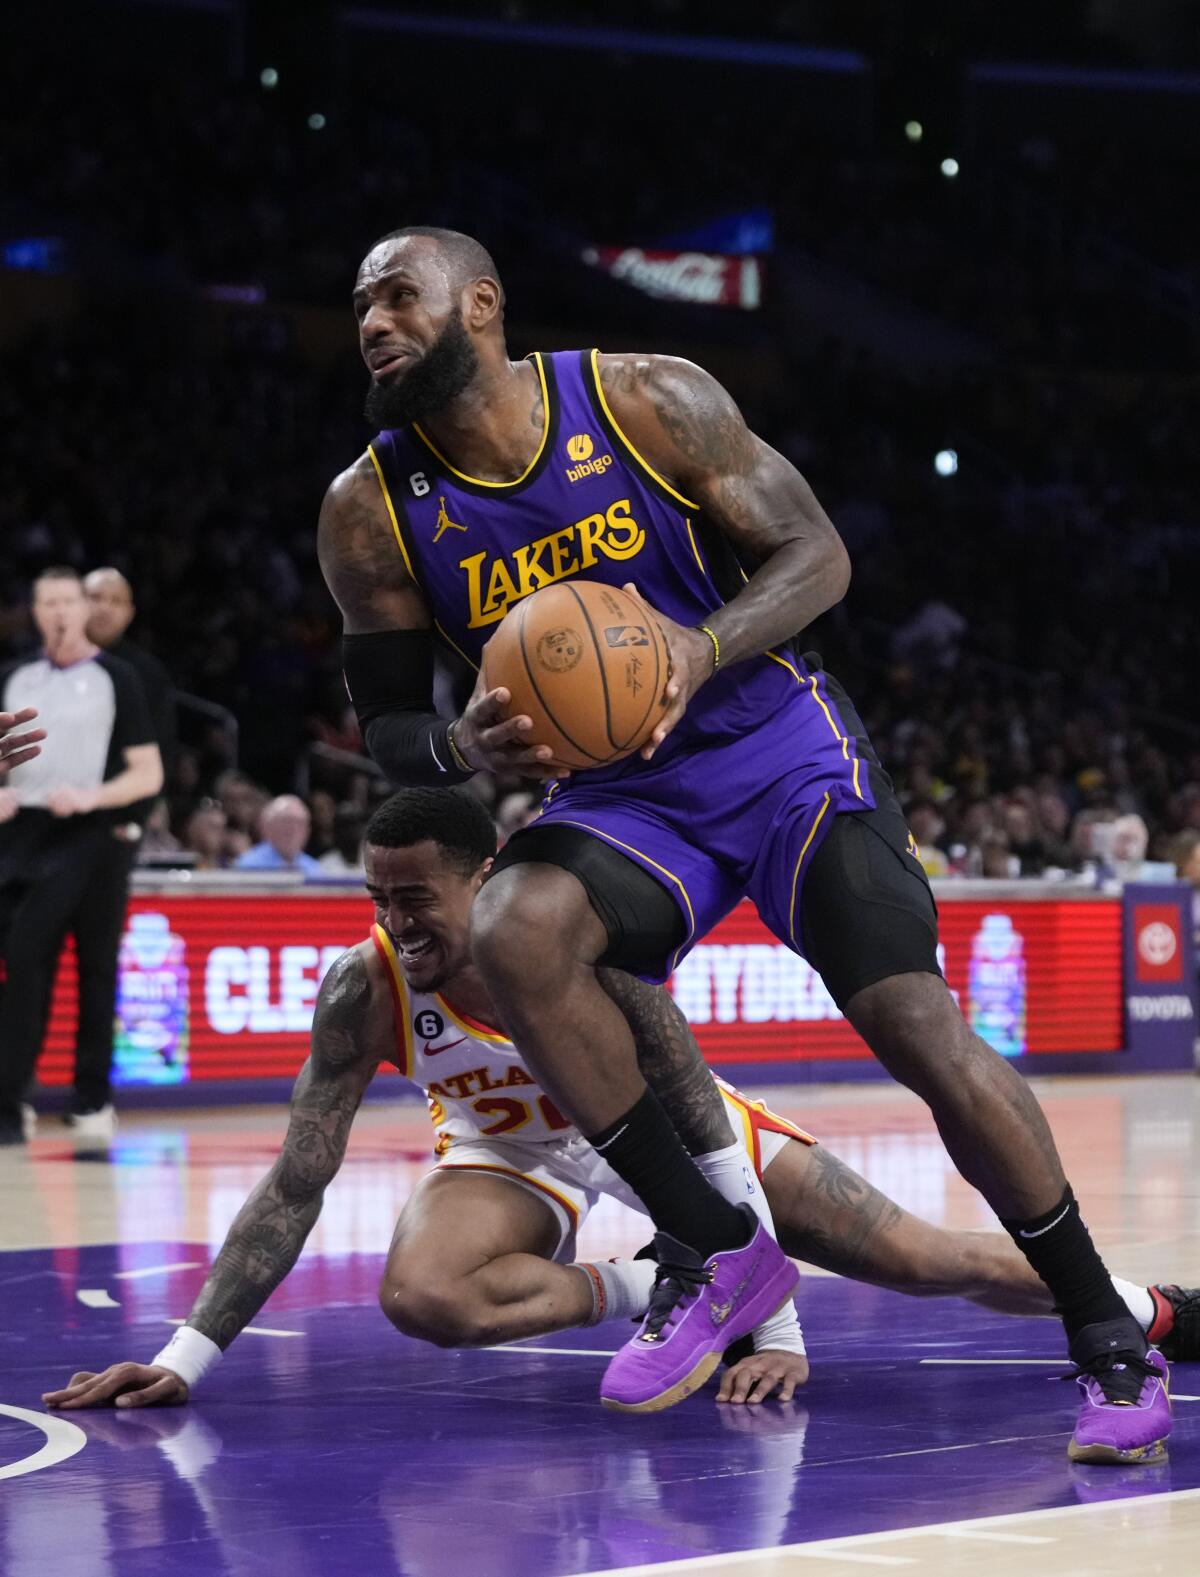 Lakers star LeBron James drives to the basket past Atlanta's John Collins during the first half Friday.